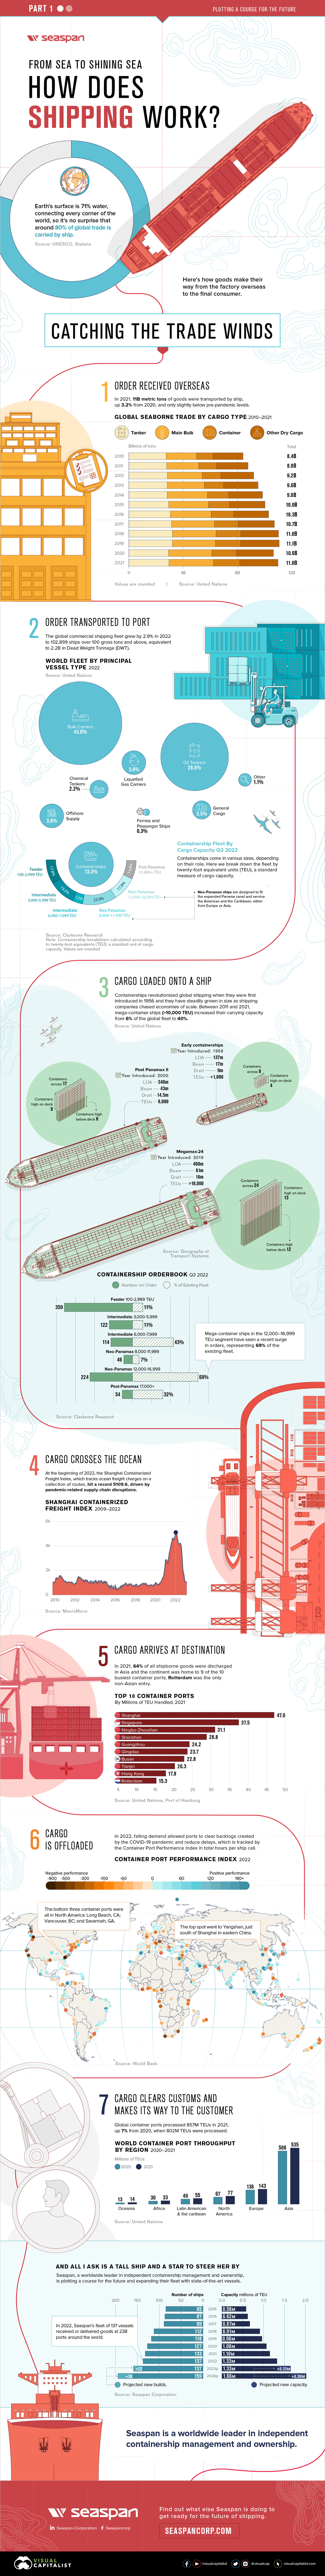 Infographic showing the steps that products take from manufacturing centers in Asia to customers in North America, as well as an overview of maritime trade and the global shipping fleet.